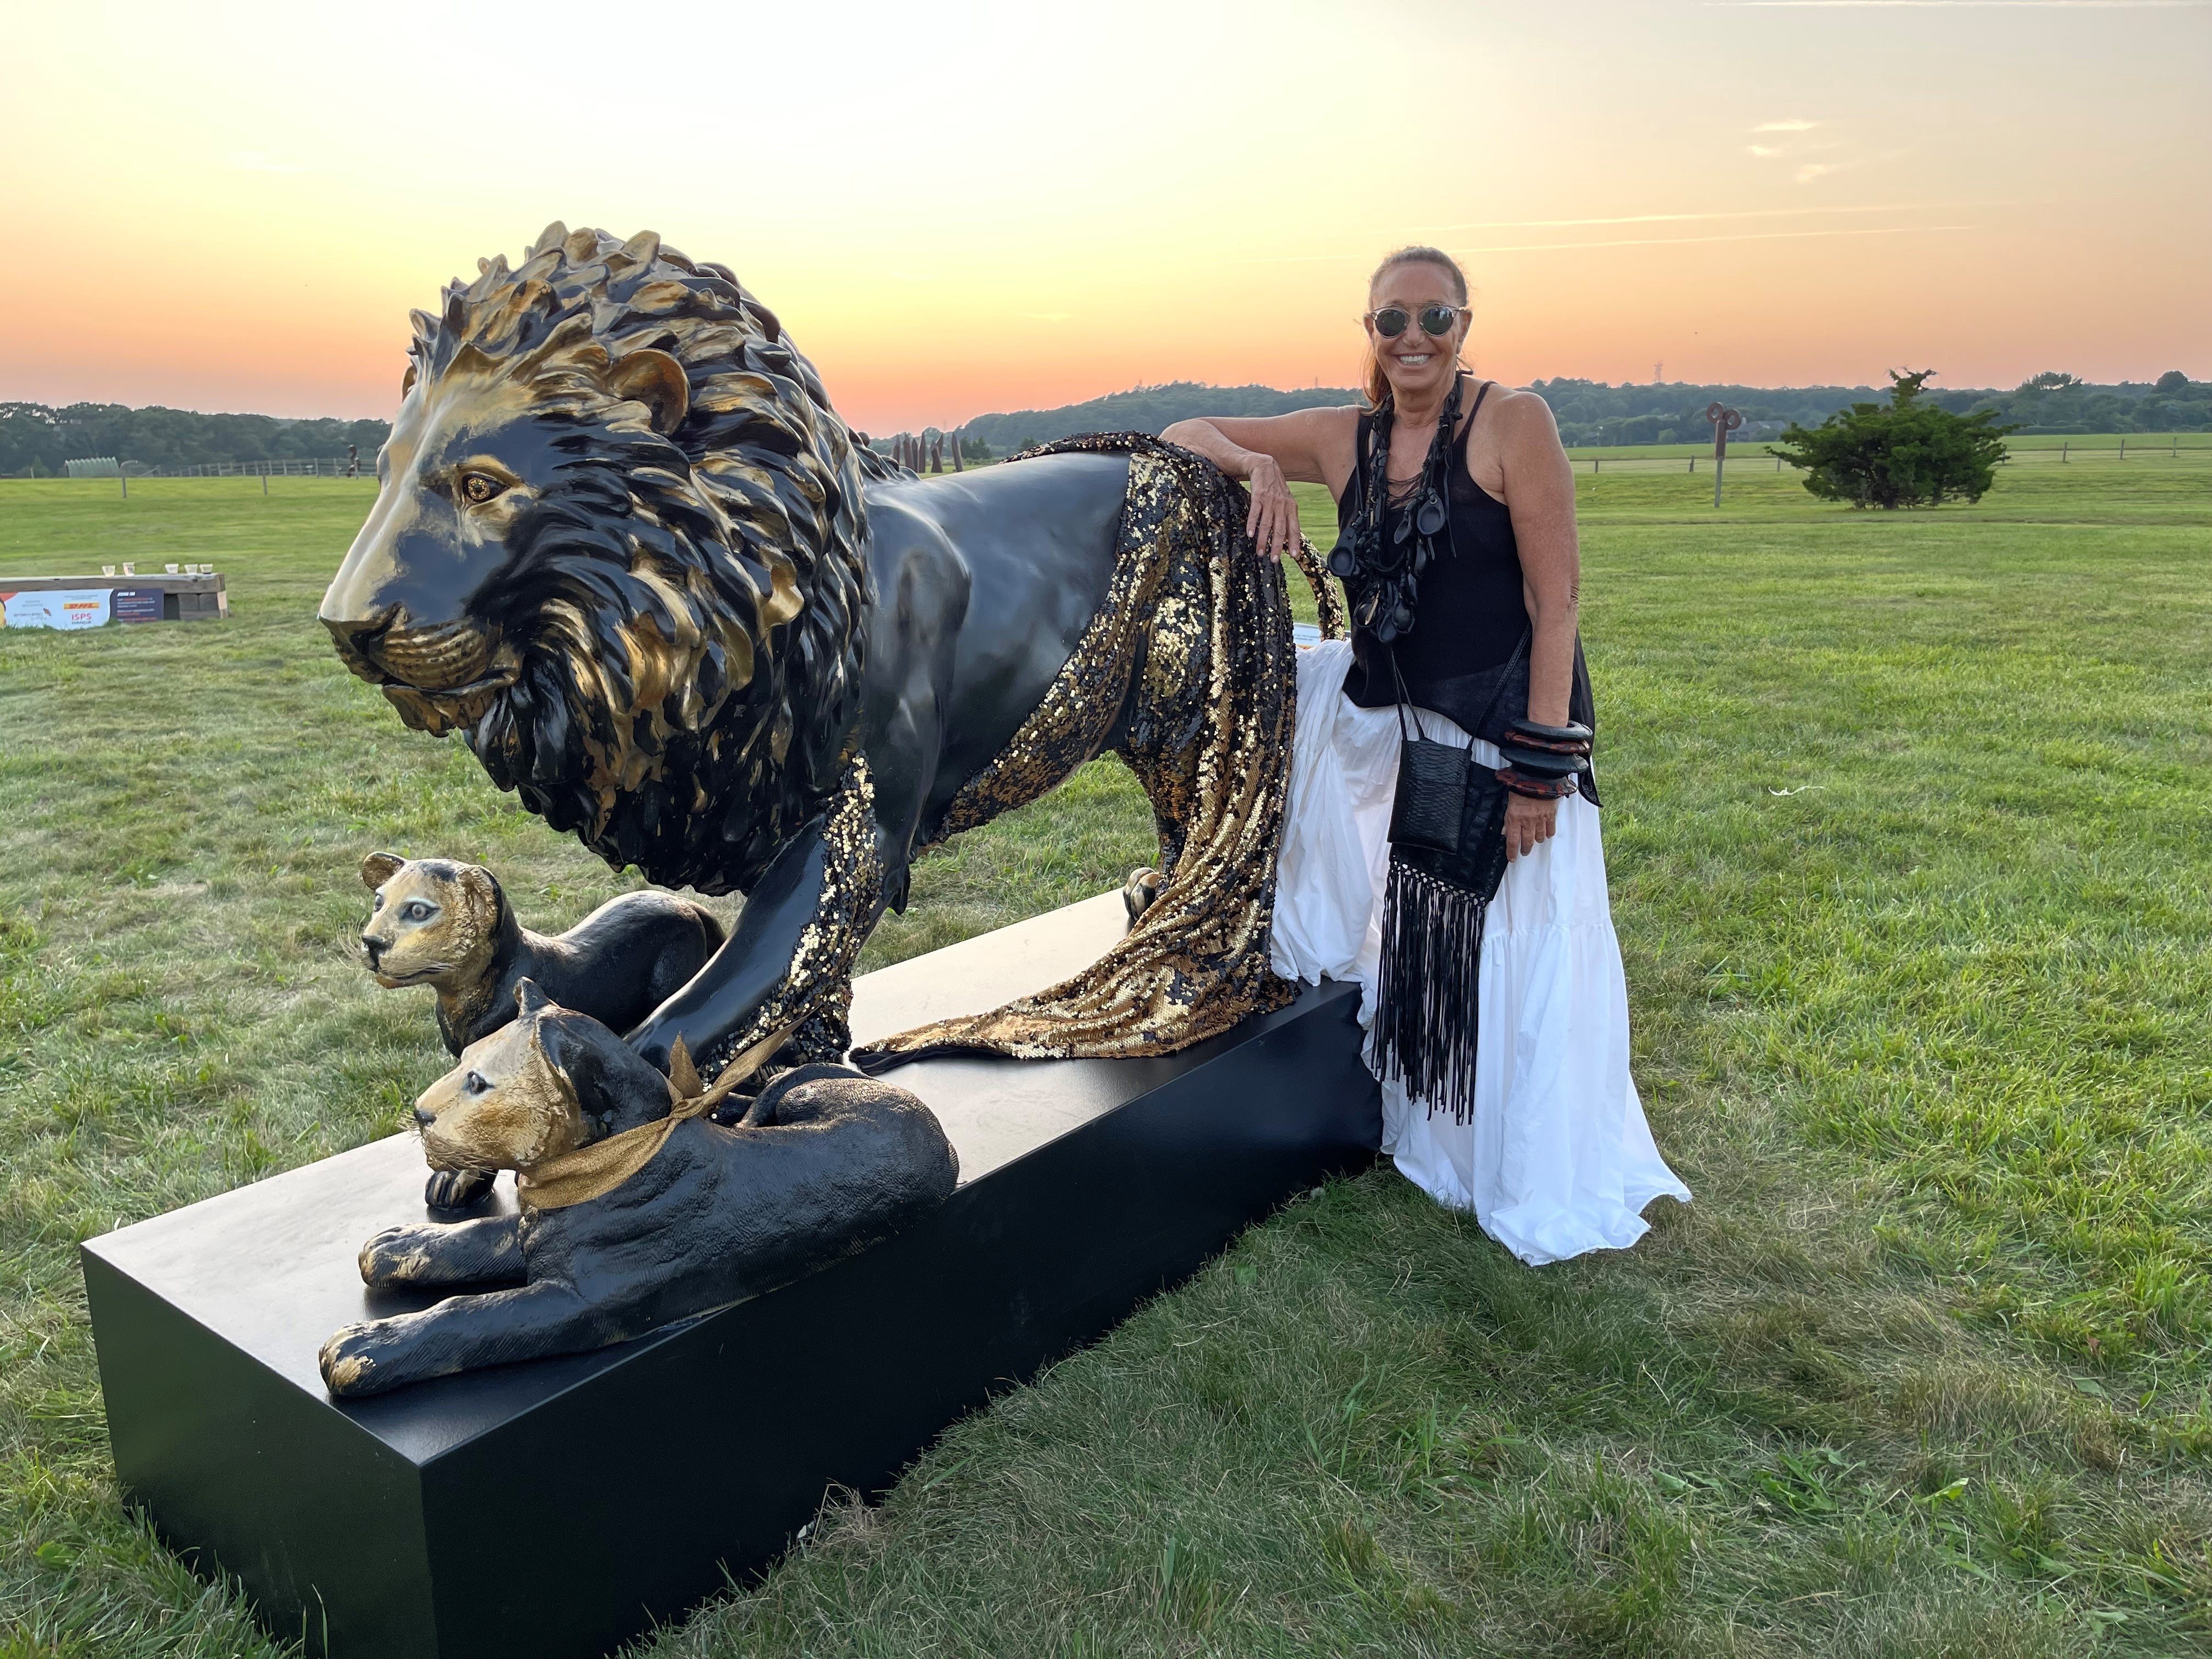 Fashion designer Donna Karan with her lion in The Hamptons (Tusk/PA)